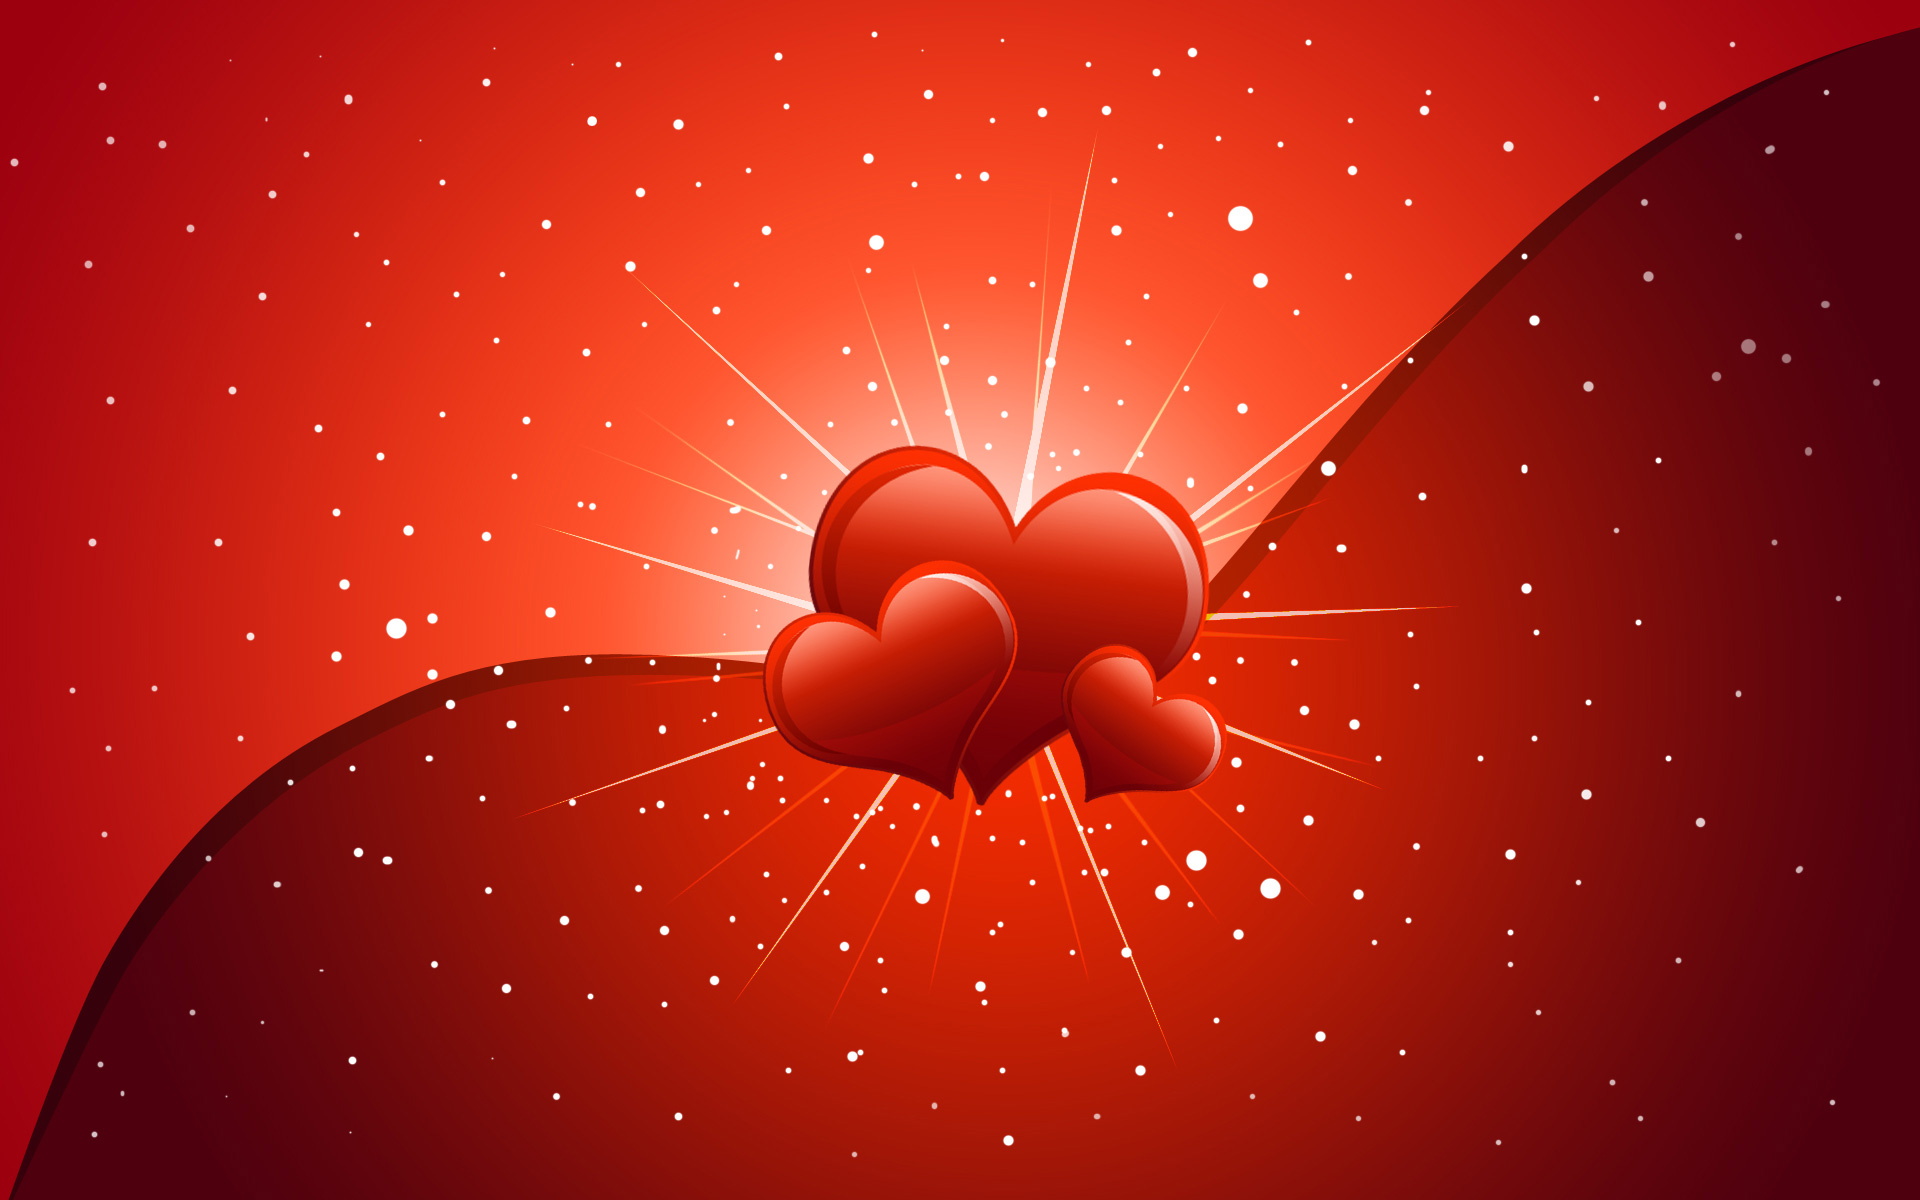 67+] Valentines Day Background Images - WallpaperSafari